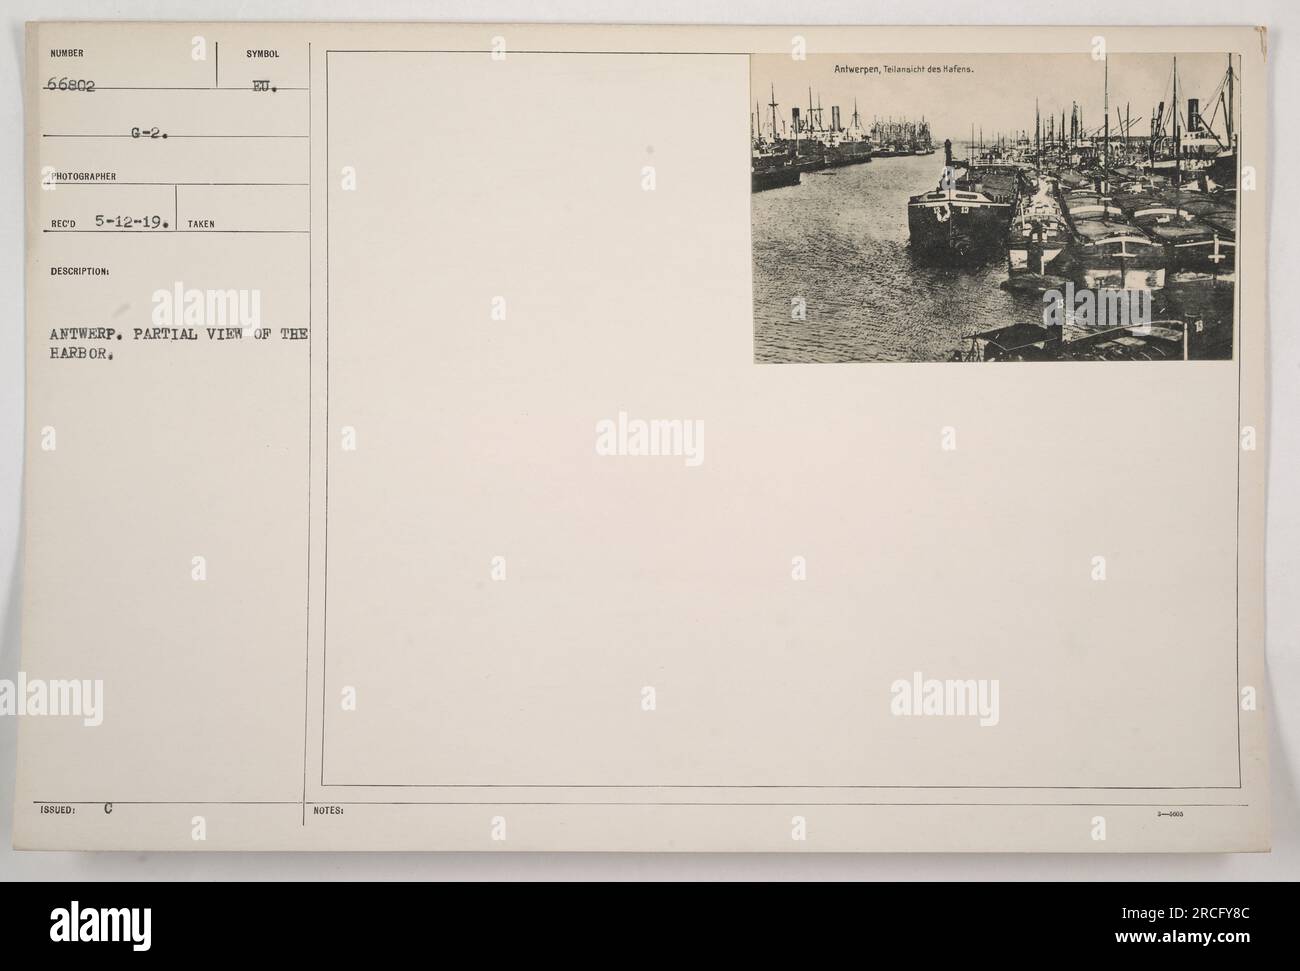 Partial view of the Antwerp Harbor, as captured in photograph number 66802 in the collection of American Military Activities during World War One. The photograph was taken by the photographer Reco on May 12, 1919. The image features a telansicht (bird's-eye view) of the harbor, with partial details visible. Stock Photo